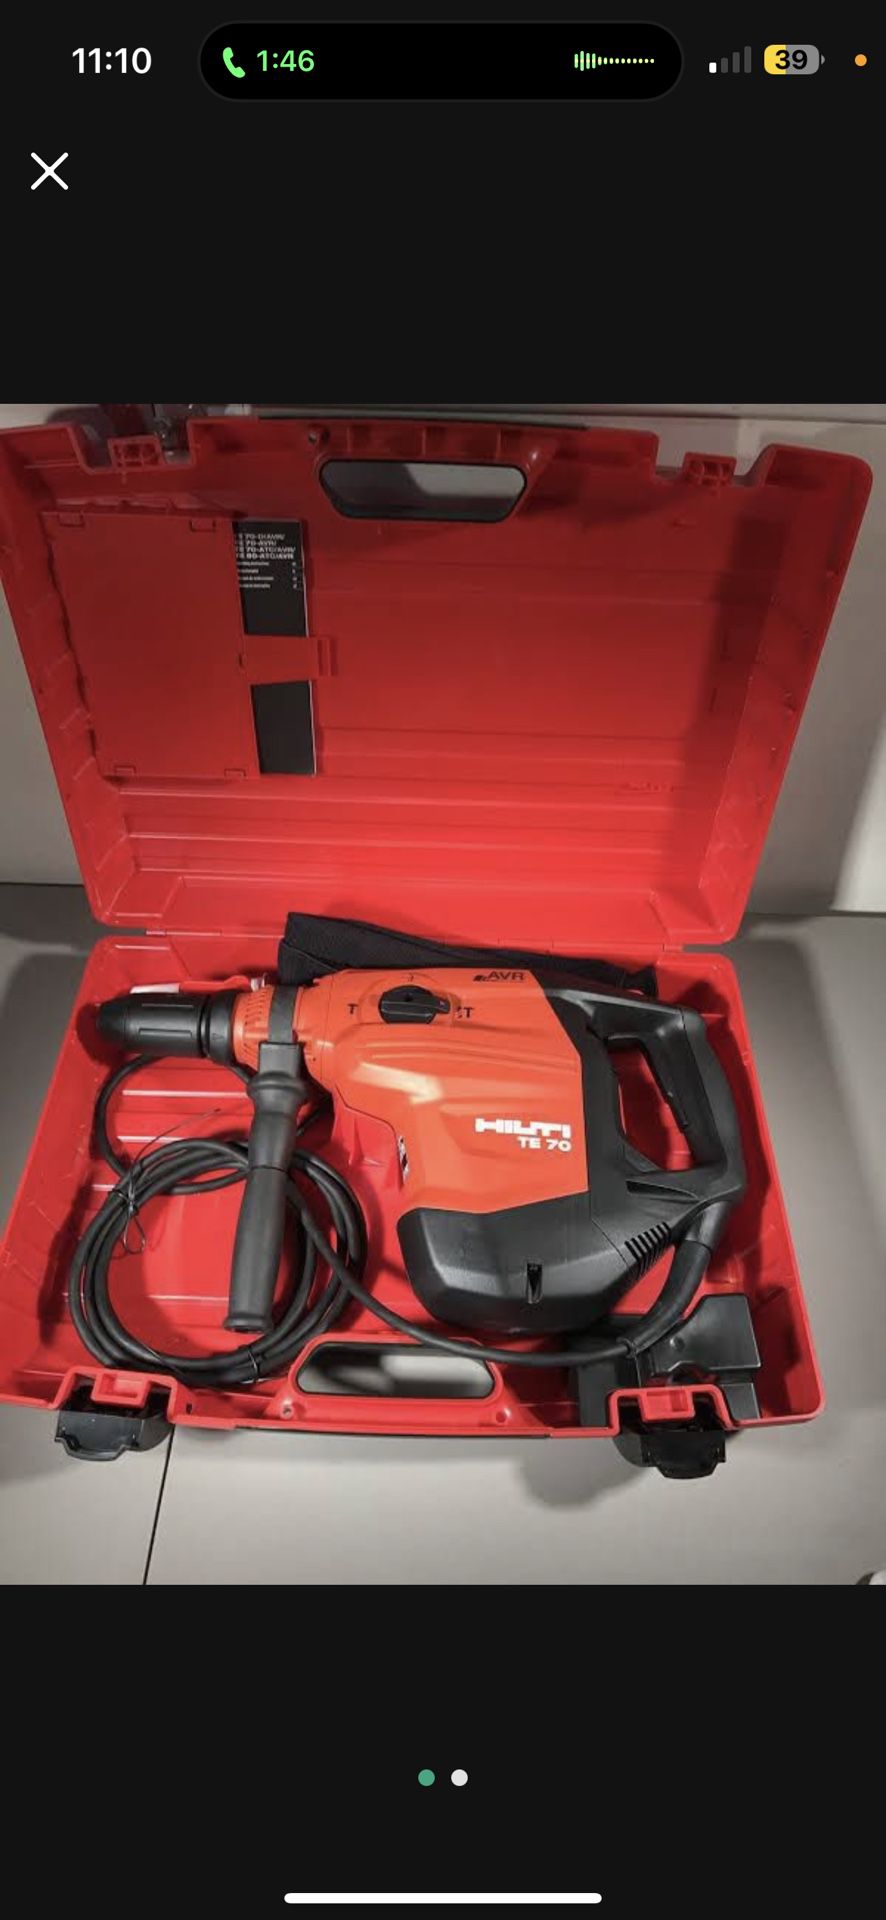 Hilti BRAND NEW TE 70 Rotary Hammer Drill Comes with Hard Case, Chisel, And Bit